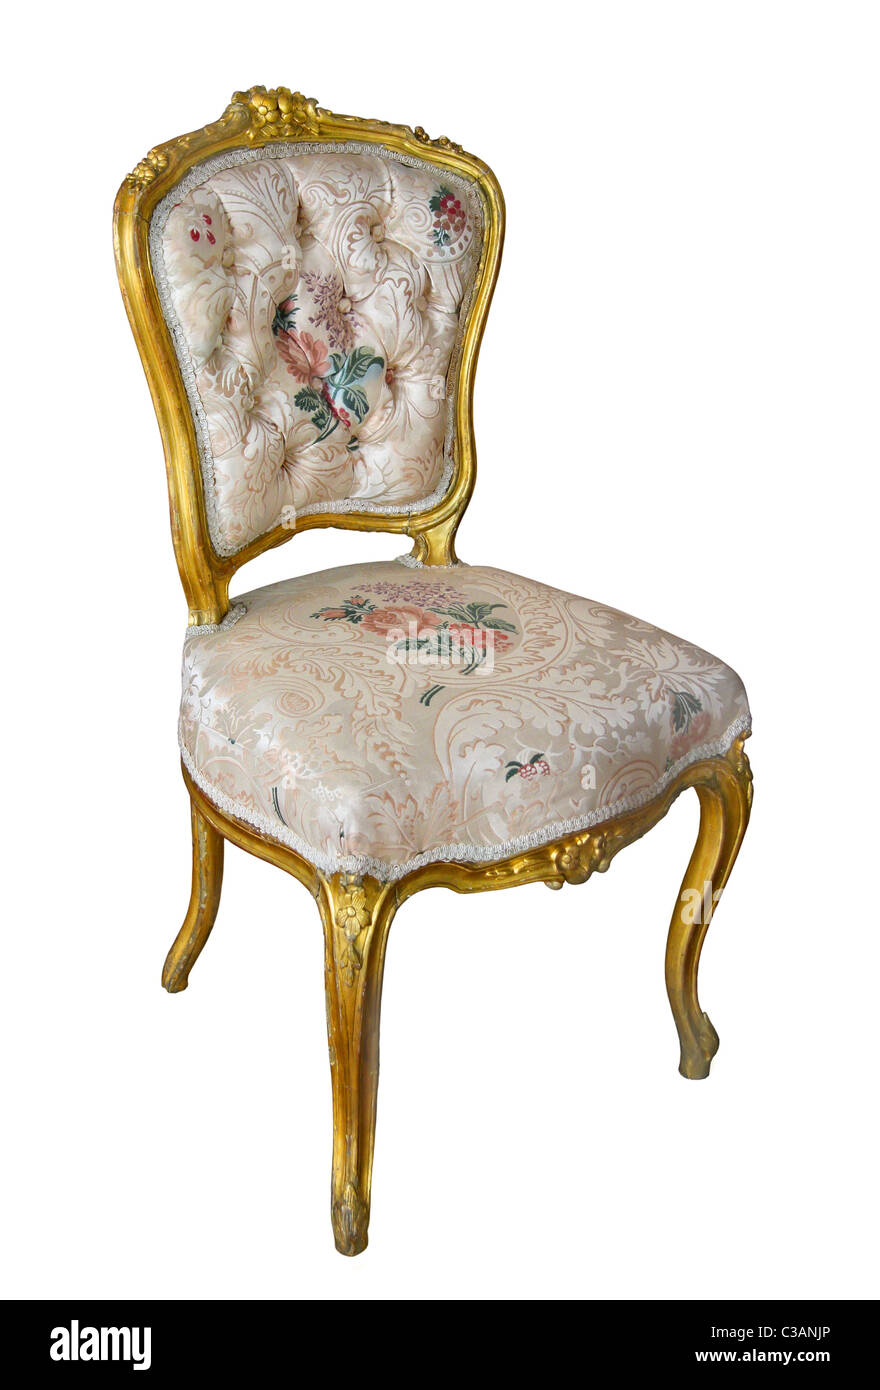 Vintage chair in baroque style Stock Photo